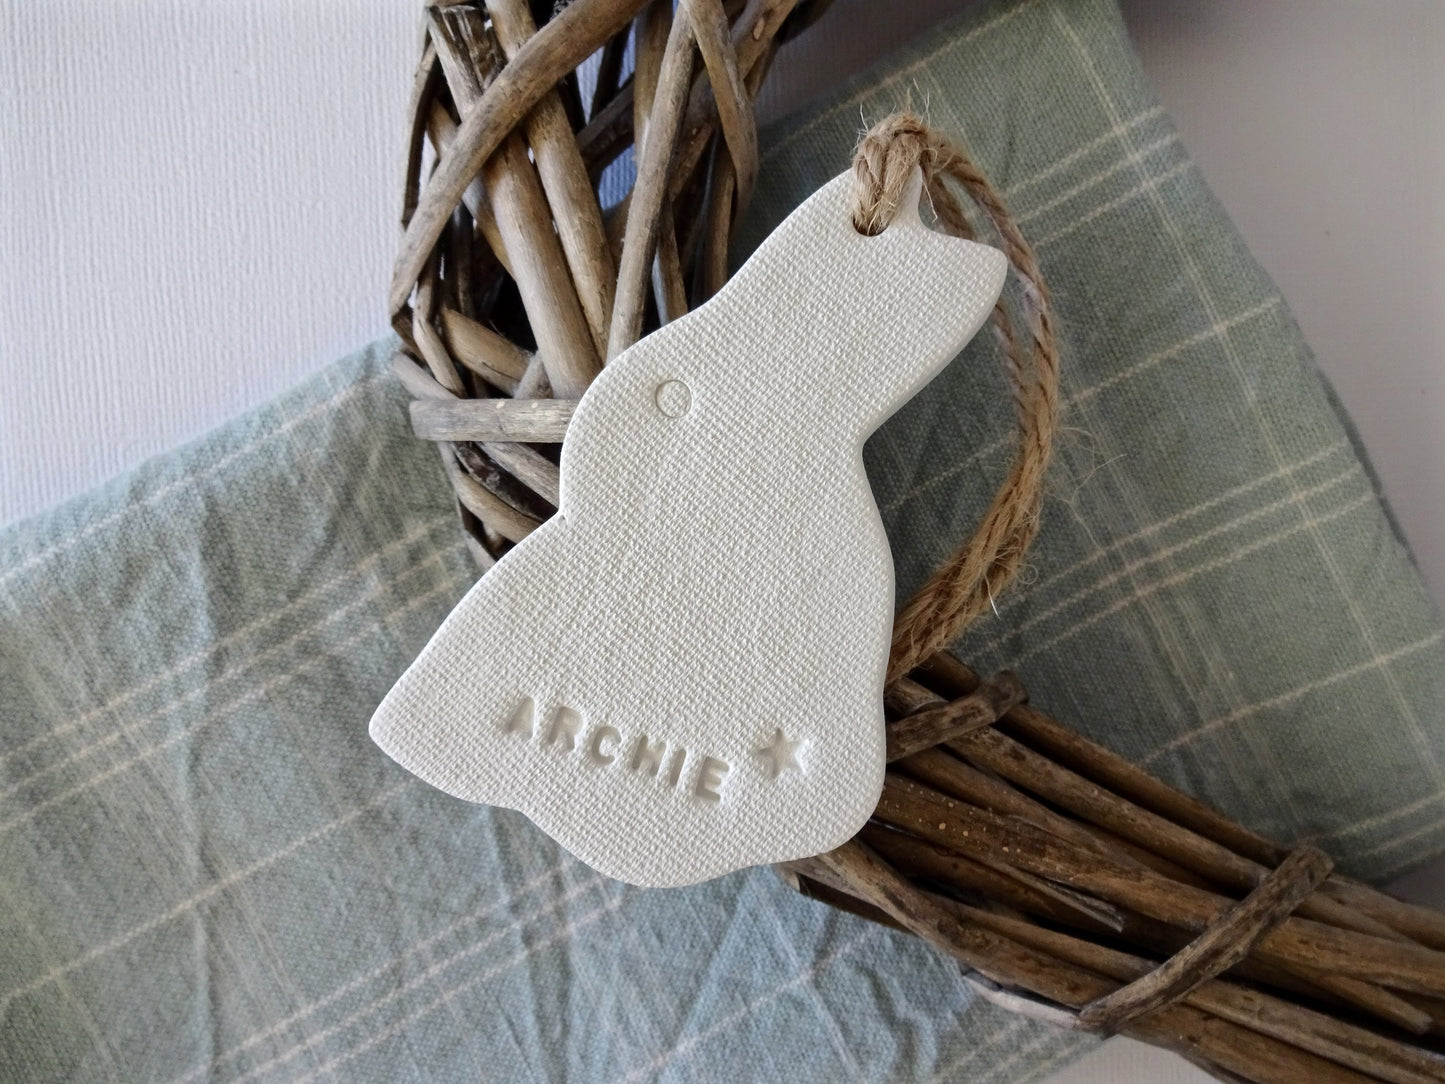 Personalised Easter bunny decoration or East gift tag